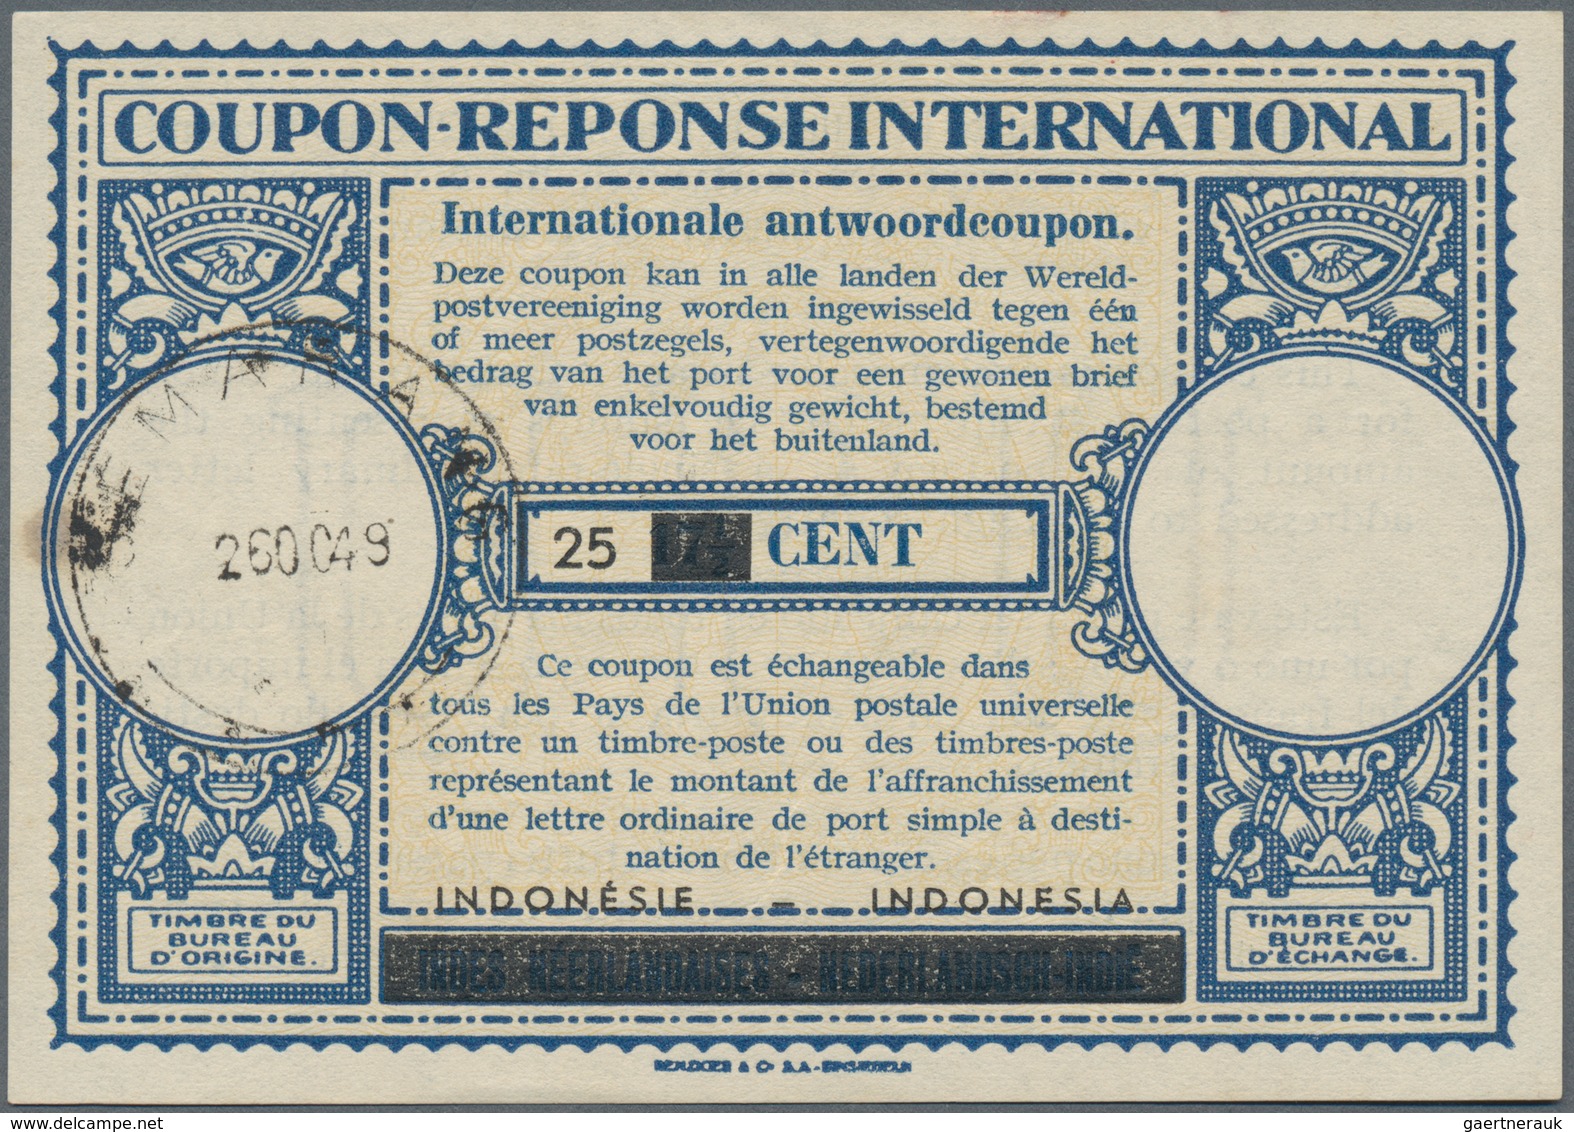 Indonesien: 1949, International Reply Coupon IRC, Surcharged 25 CENT On Old DEI Form Canc. "SEMARANG - Indonesia